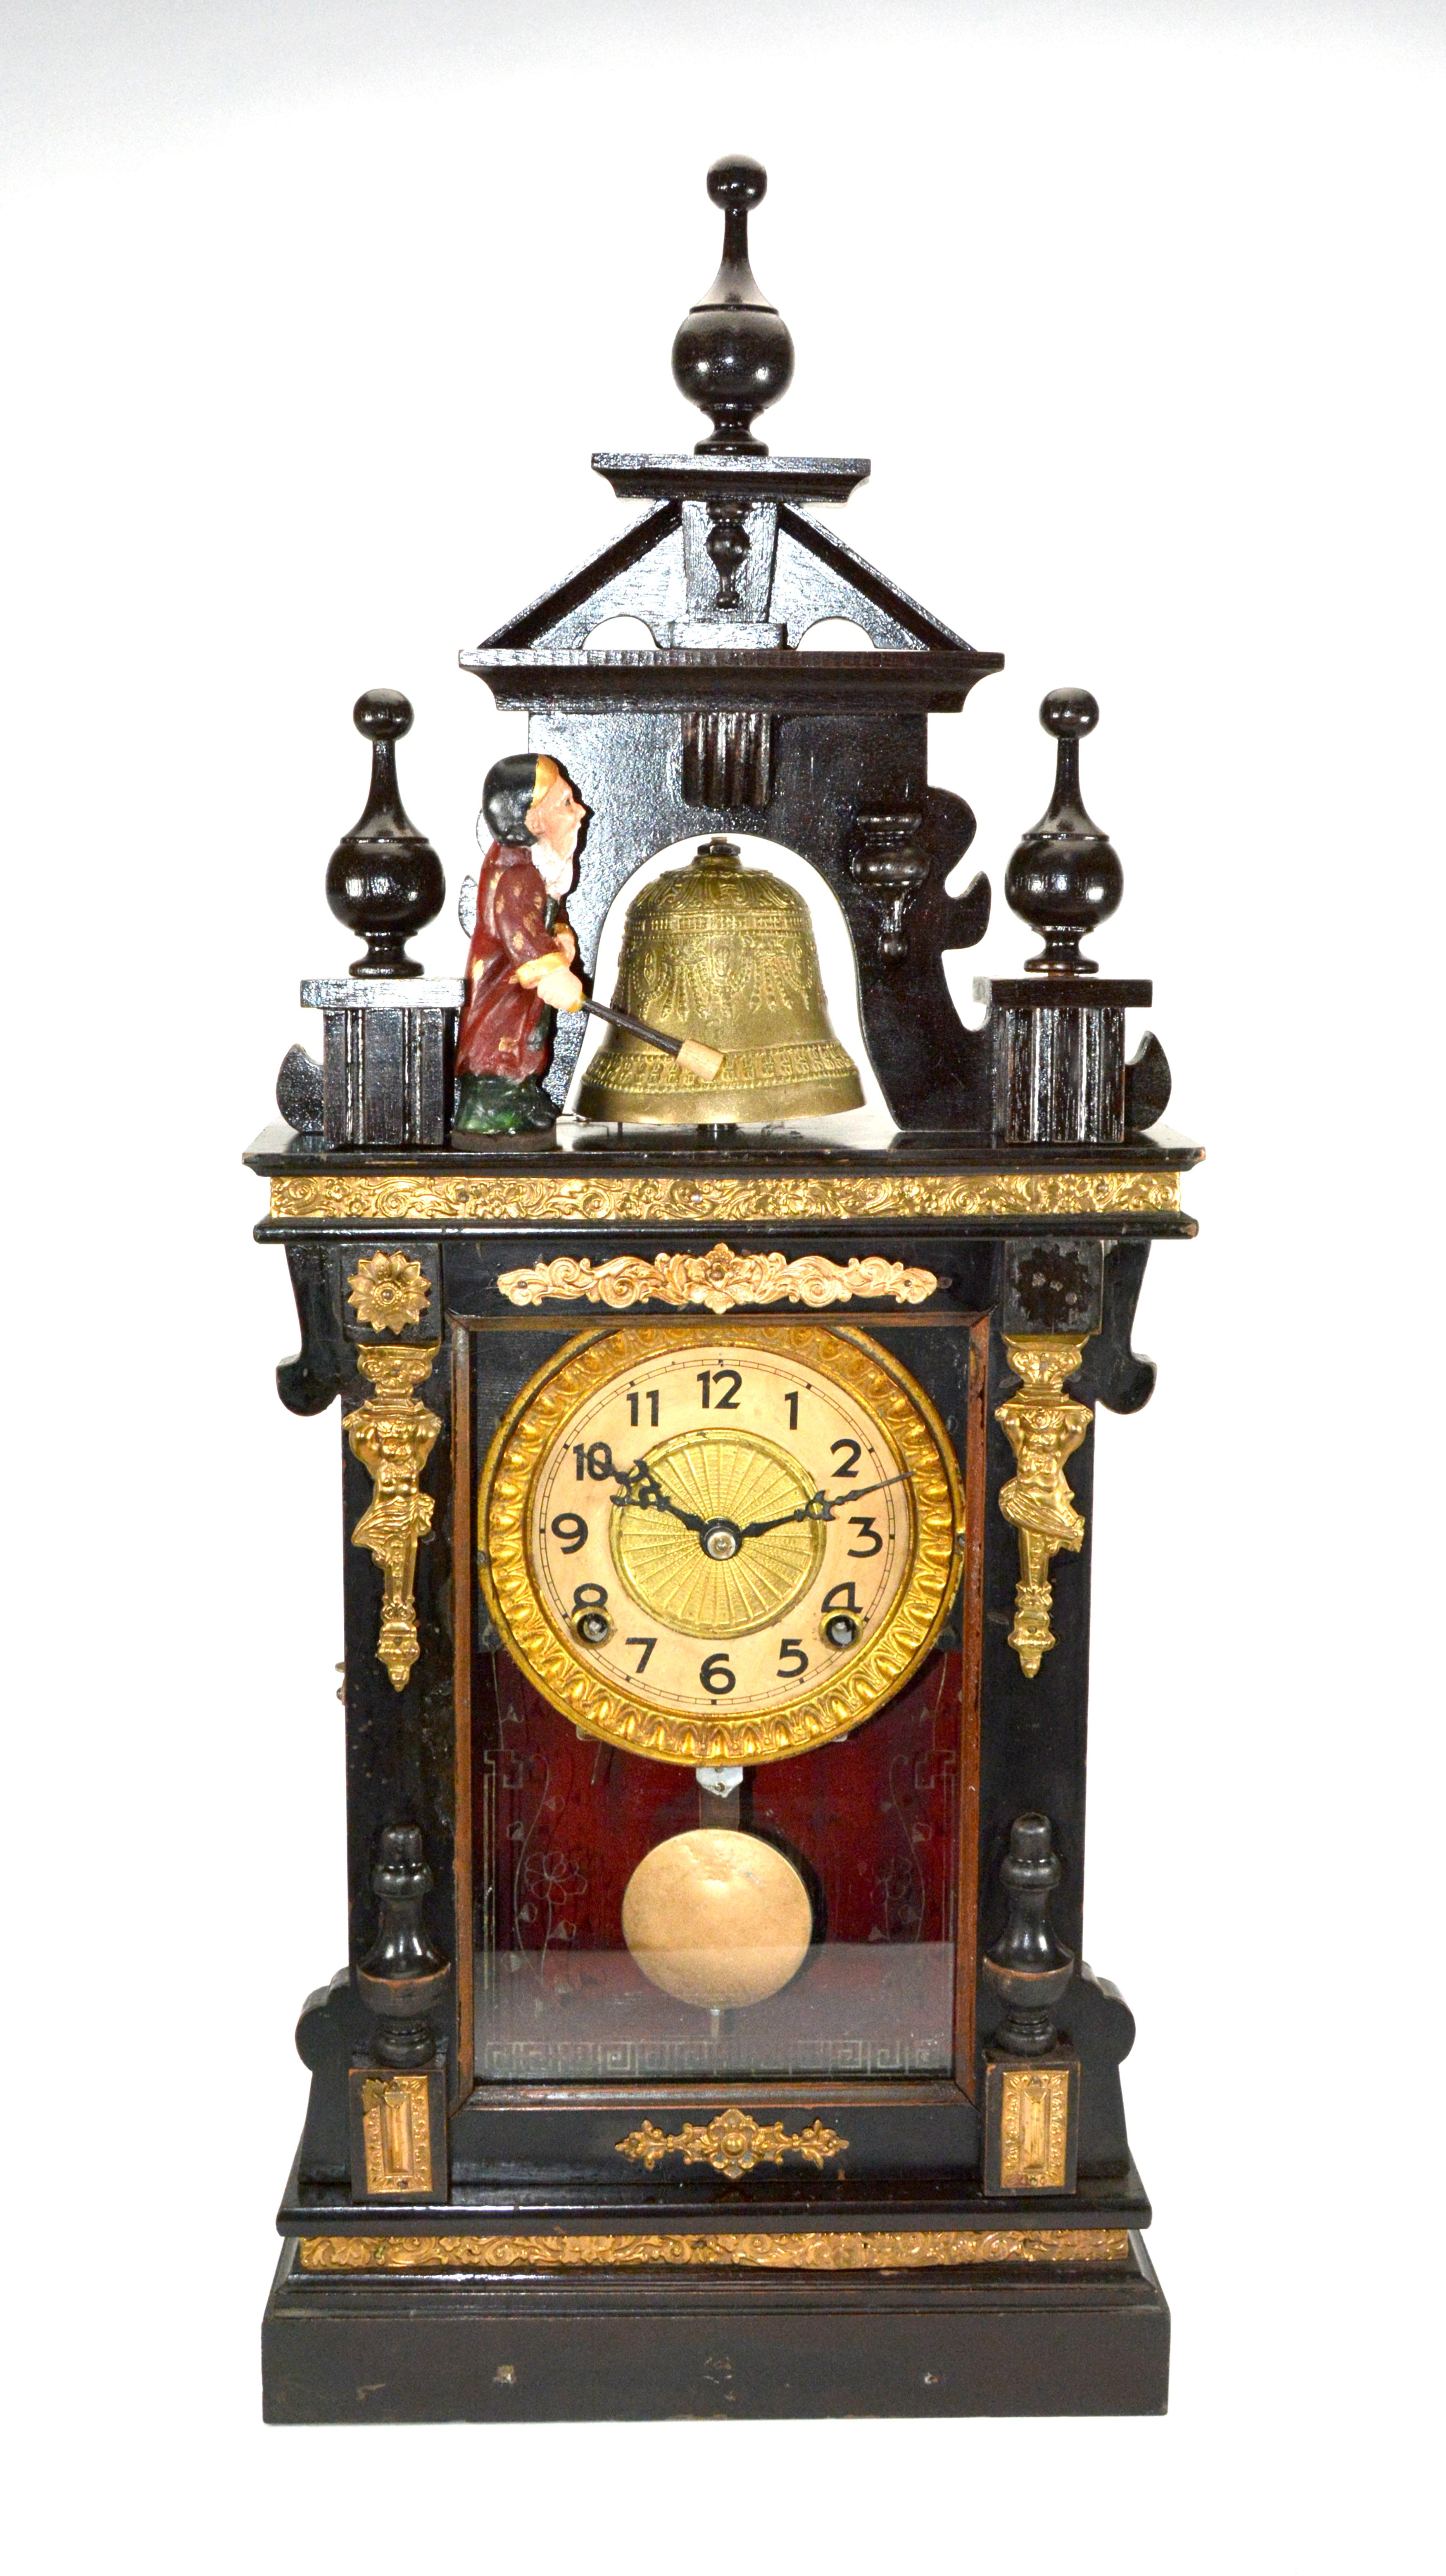 Antique Animated Monk Striking Bell 3 Finial Brass Decorated 8 Day Mantel Clock

MOVEMENT: 8 day wind up mechanism

FUNCTION: time with hourly striking

SIZE: 27-3/4